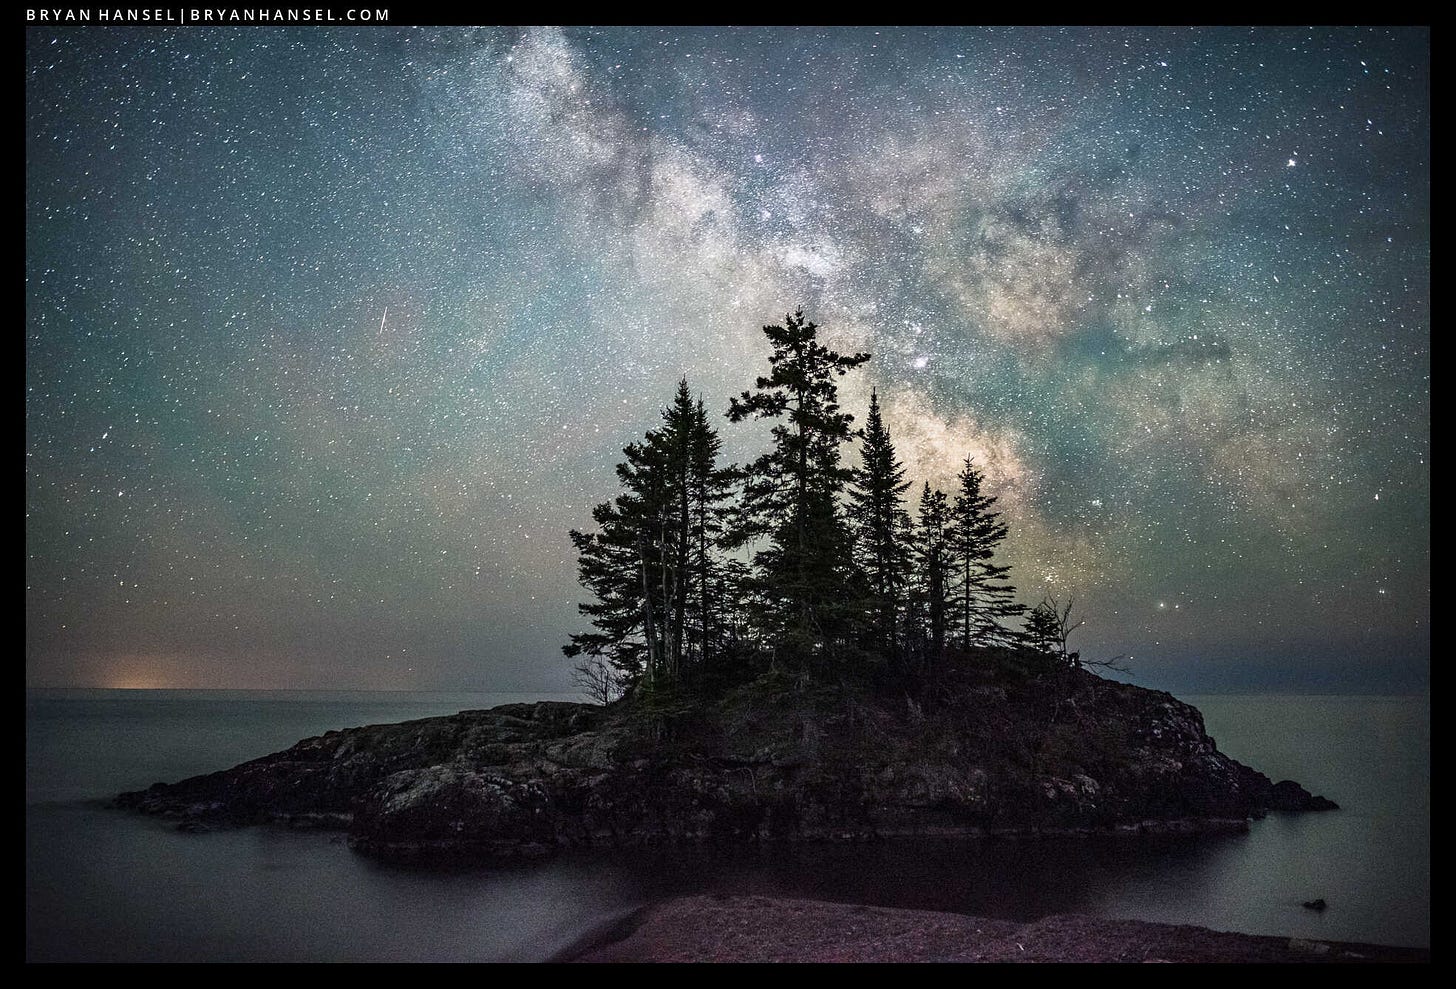 The Milky Way over Lake Superior. A small island with quirky fir and spruce trees is in front of the Milky Way.